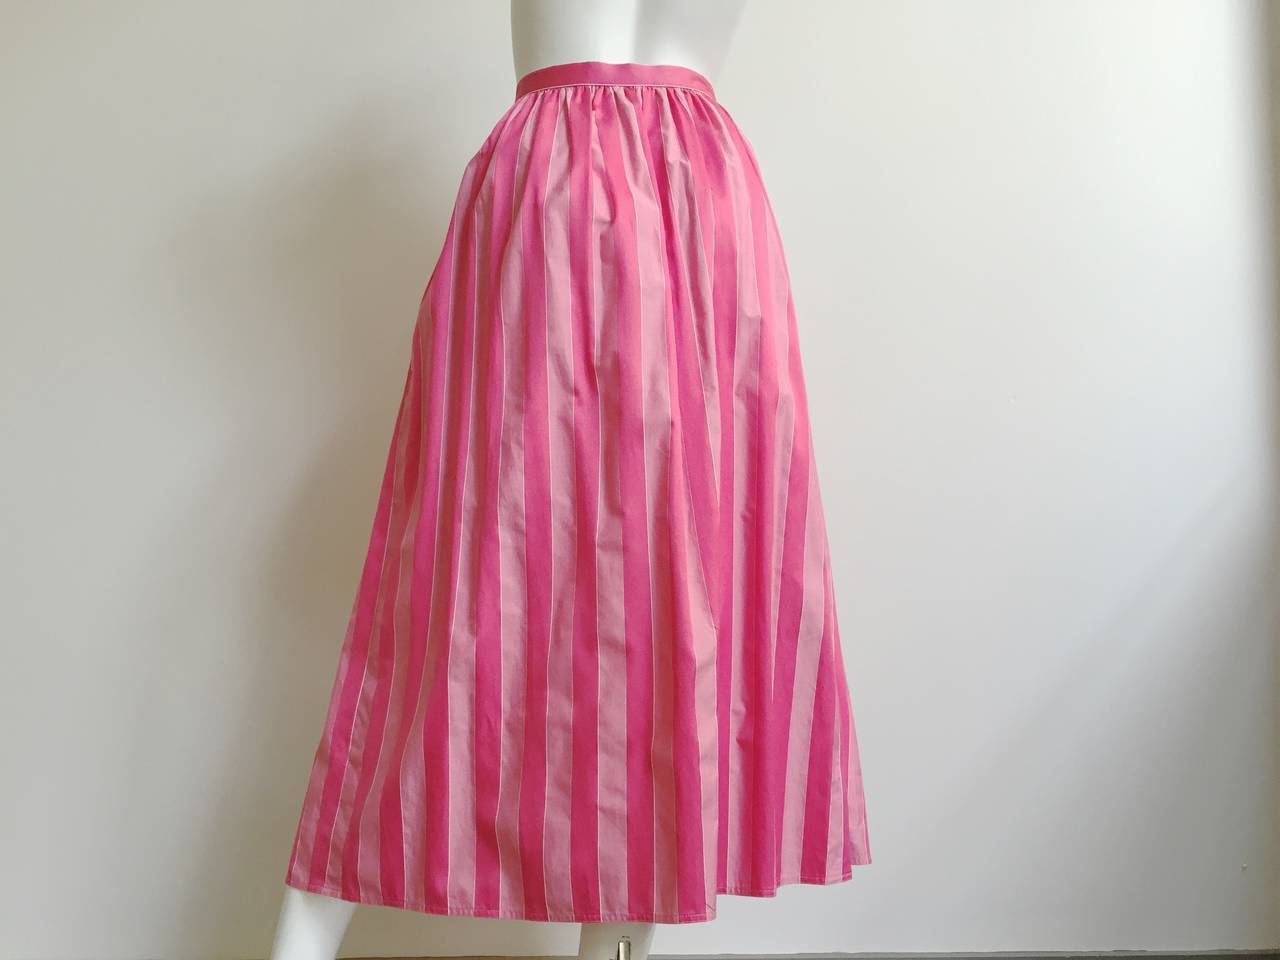 Adele Simpson for Saks Fifth Avenue 80s pink cotton skirt with pockets size 6. 2